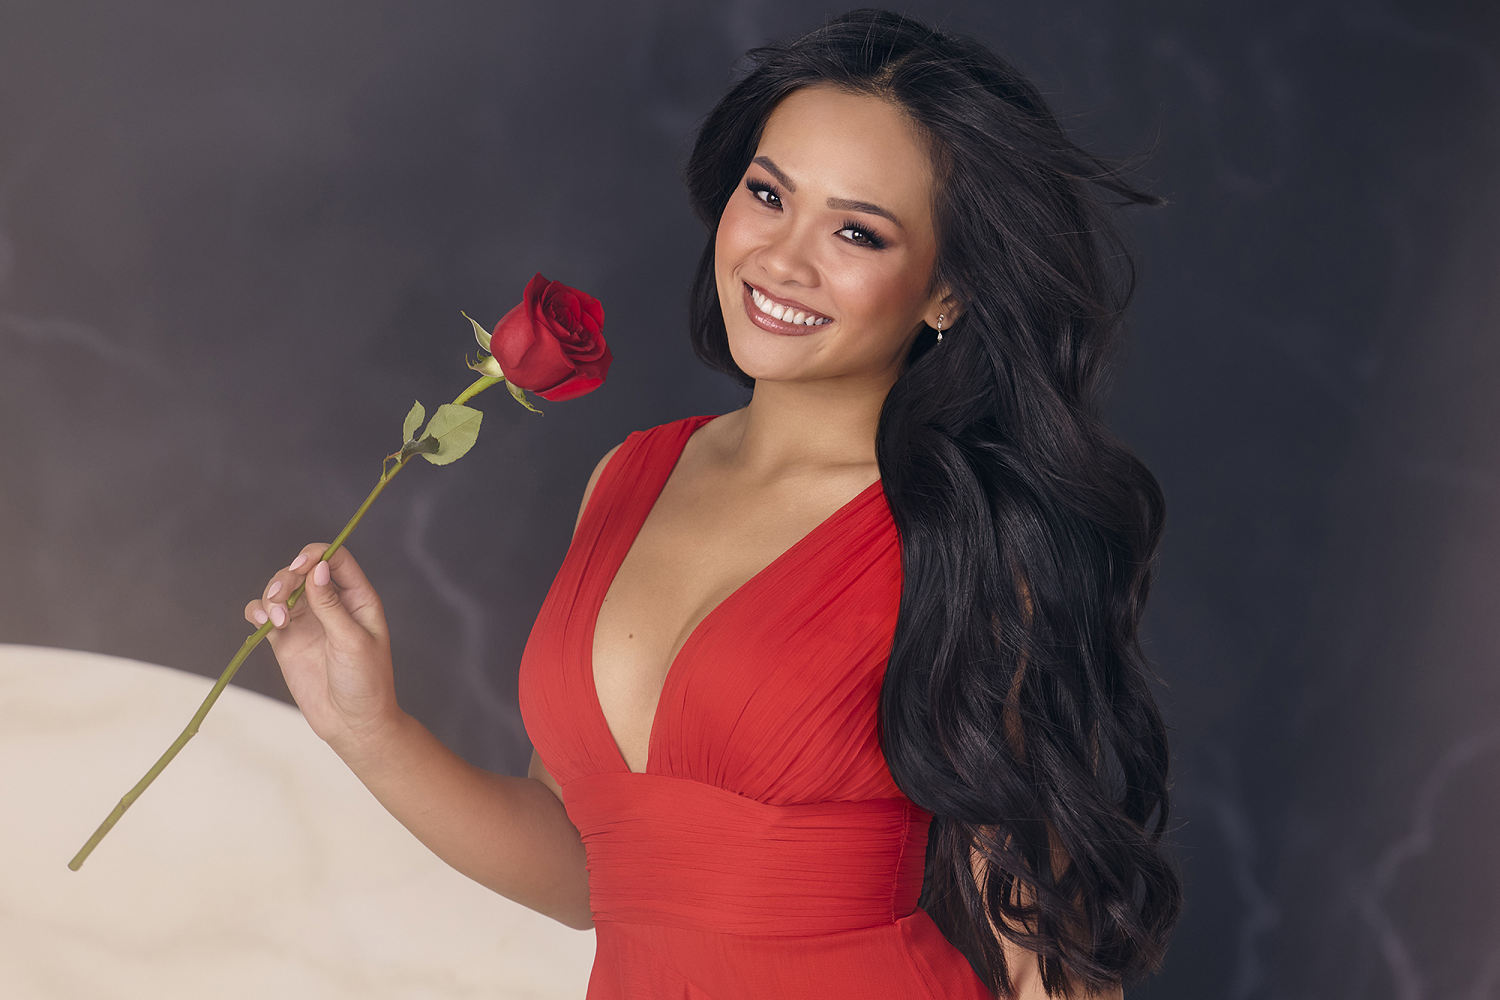 'The Bachelorette' Jenn Tran says seeing her Vietnamese family on TV was emotional